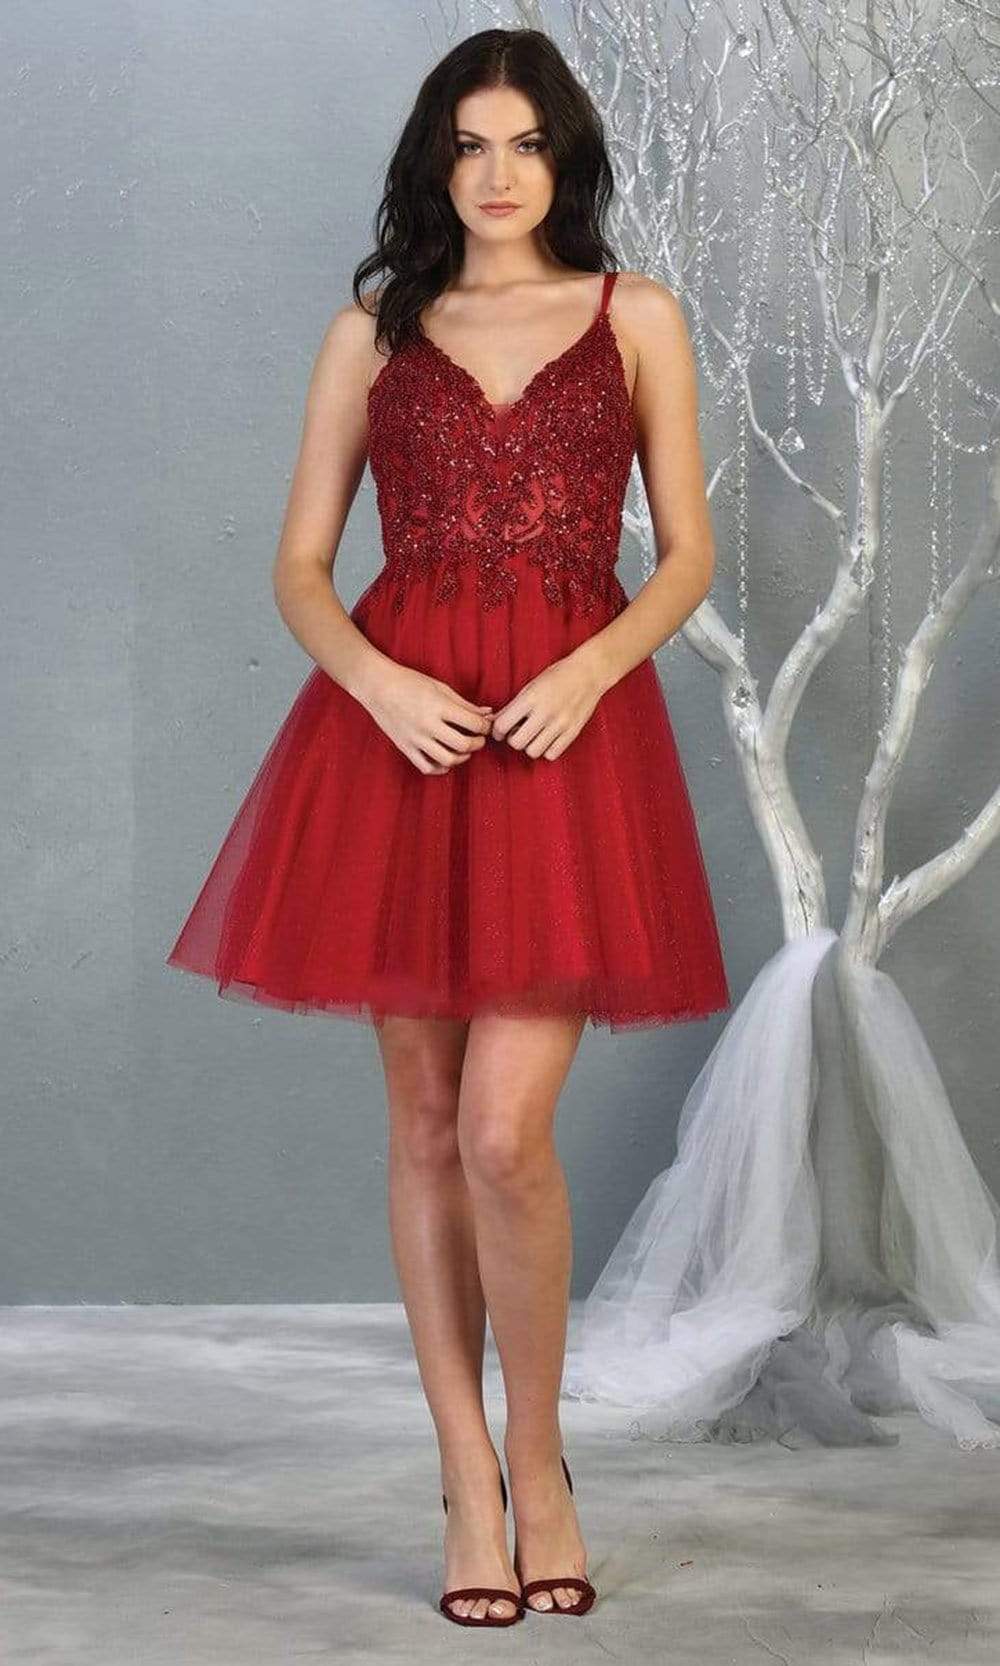 May Queen - MQ1813 Beaded Illusion Bodice A-Line Dress Cocktail Dresses 2 / Burgundy